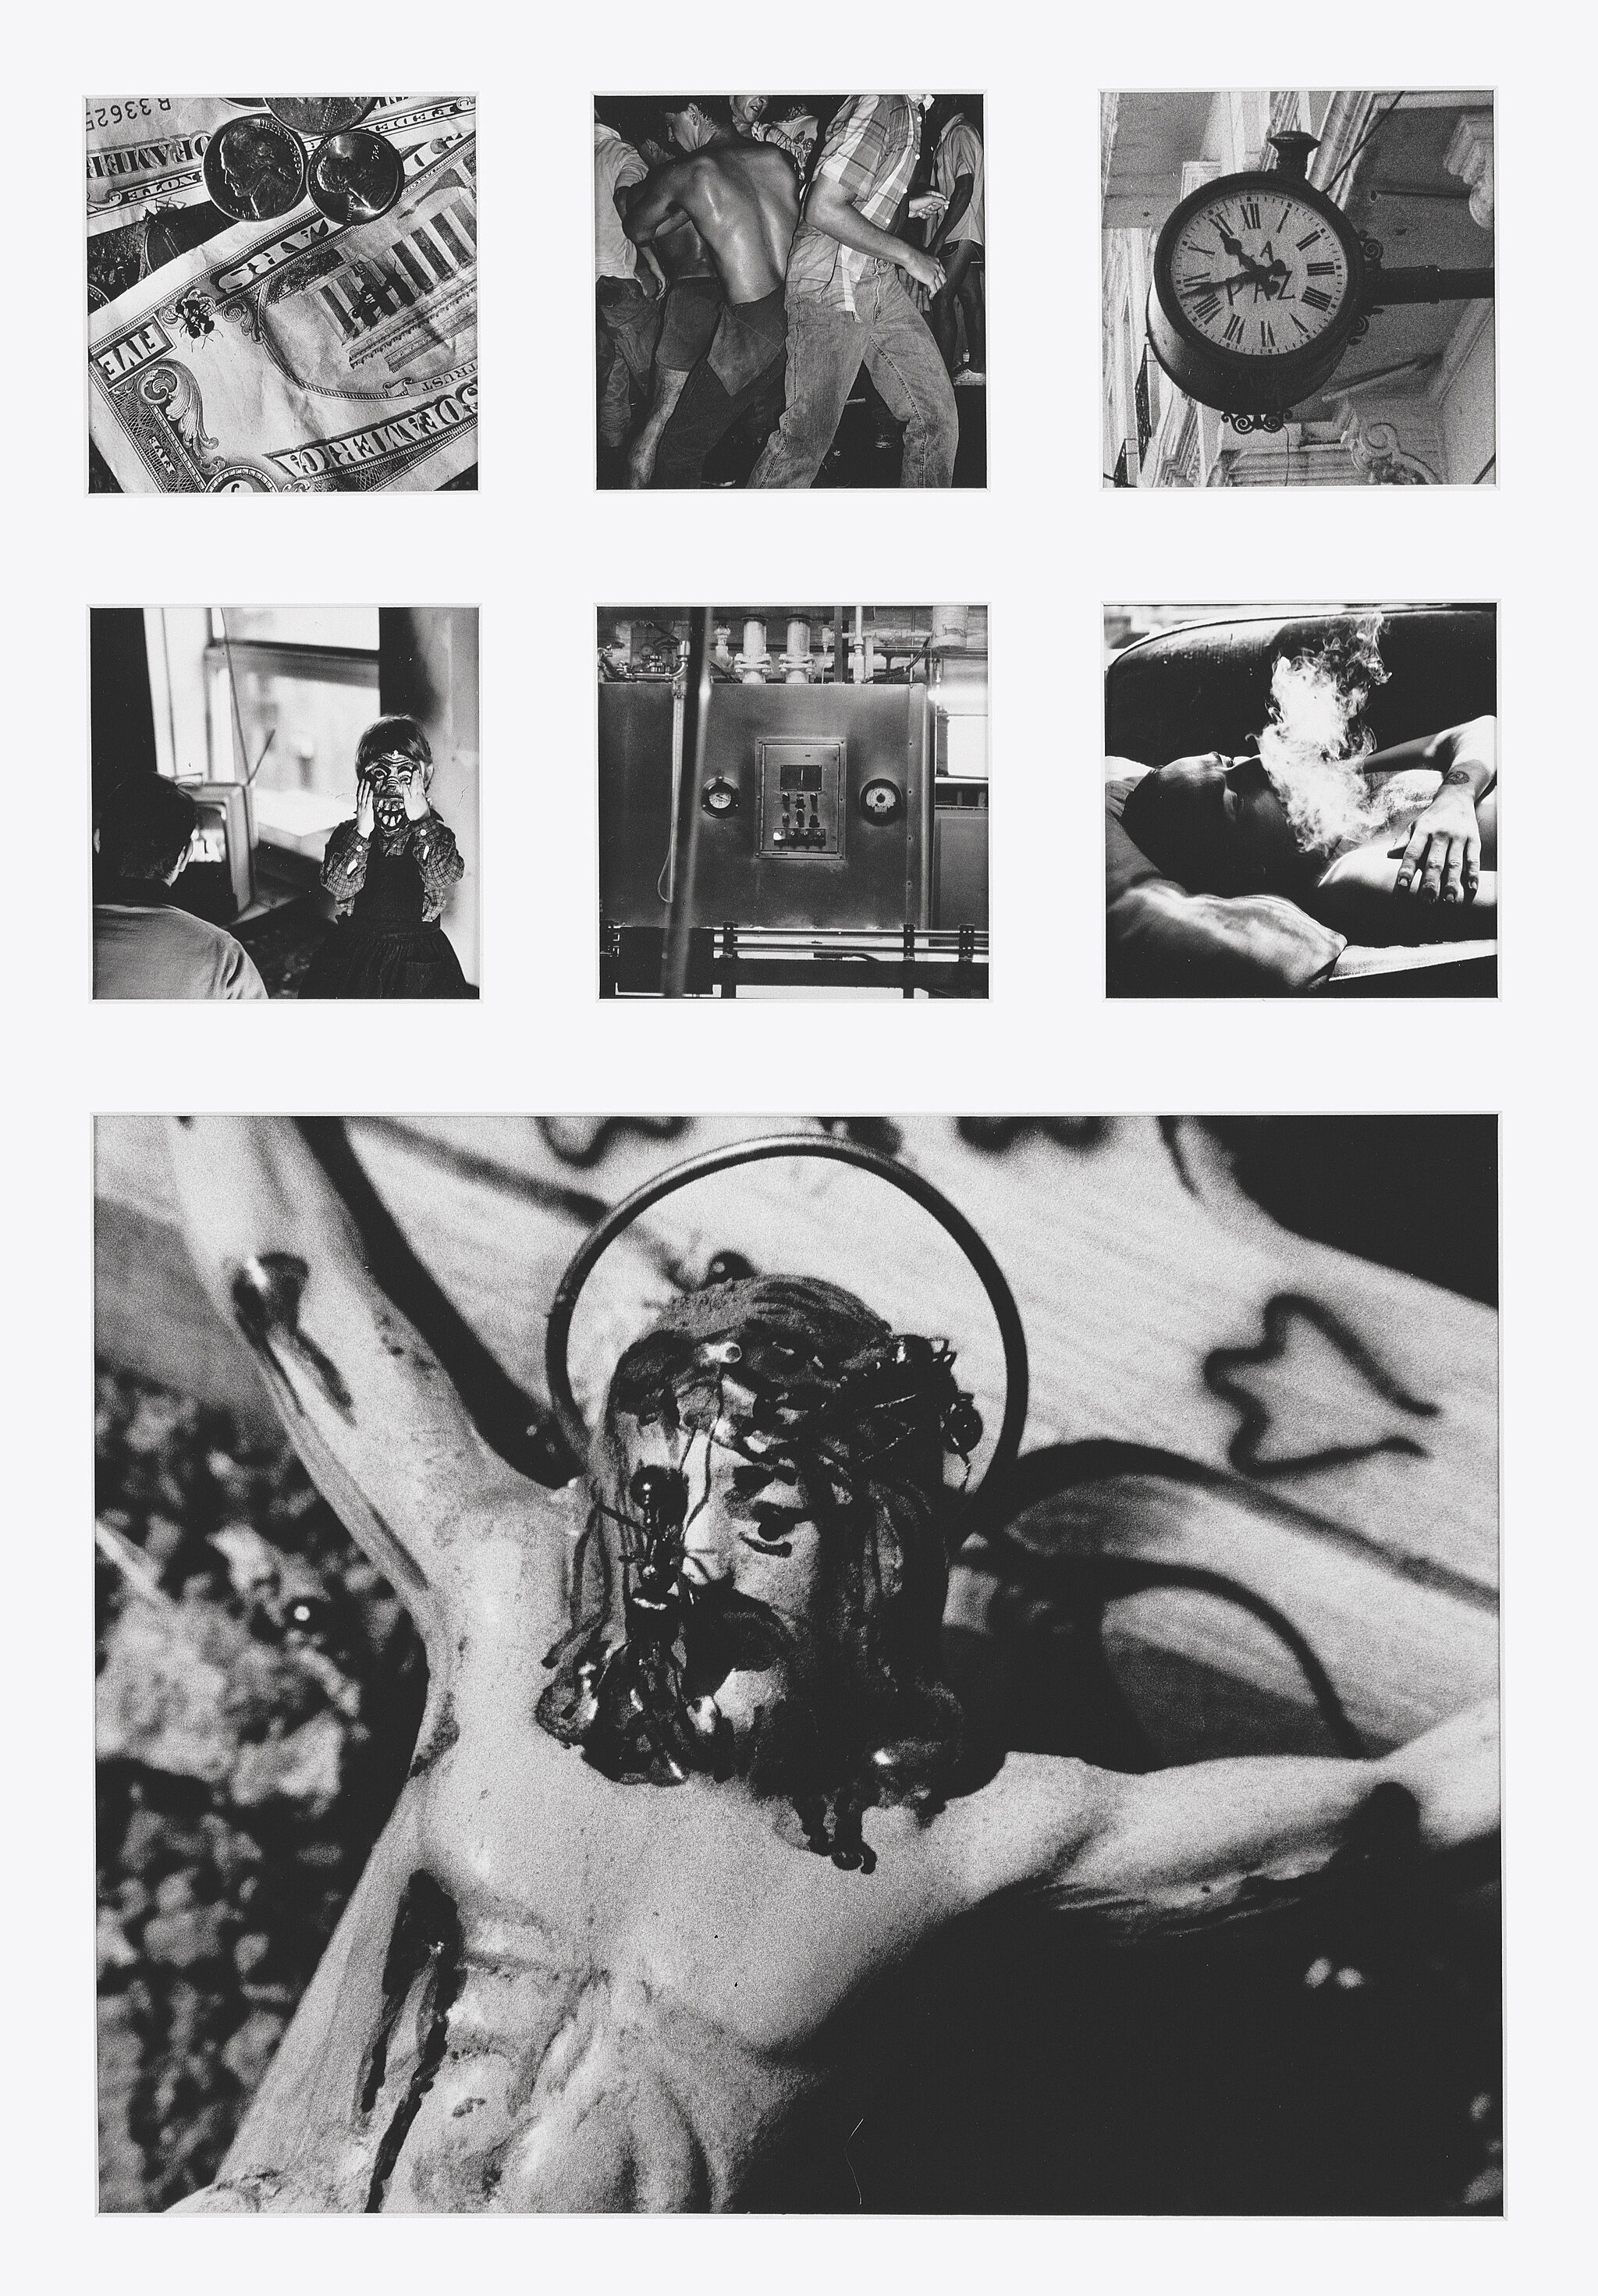 Seven various photographs in black and white. 